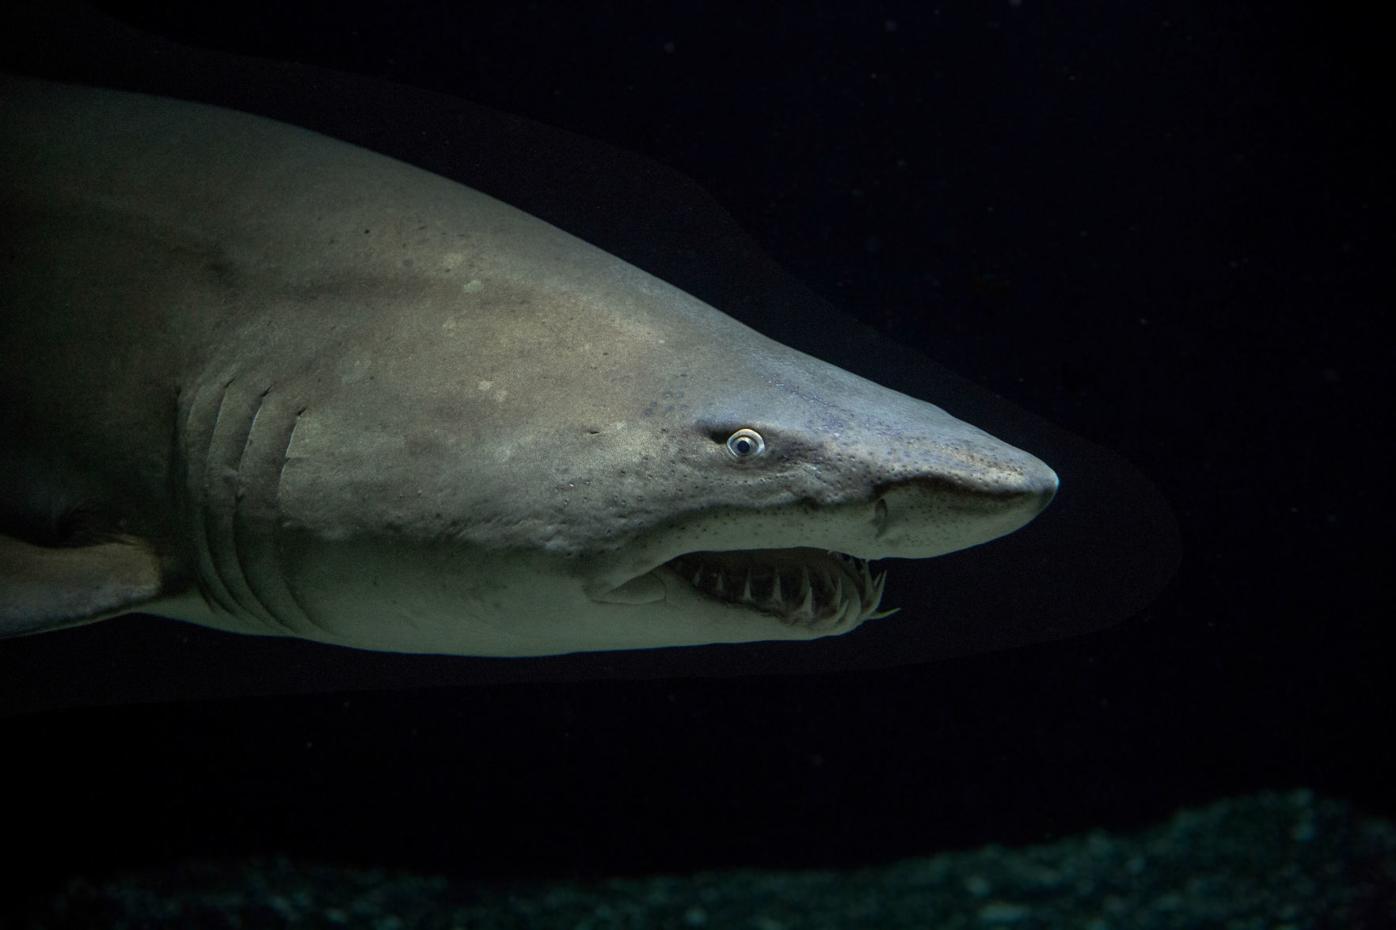 Jersey Shore Sand Tiger Sharks - On The Water